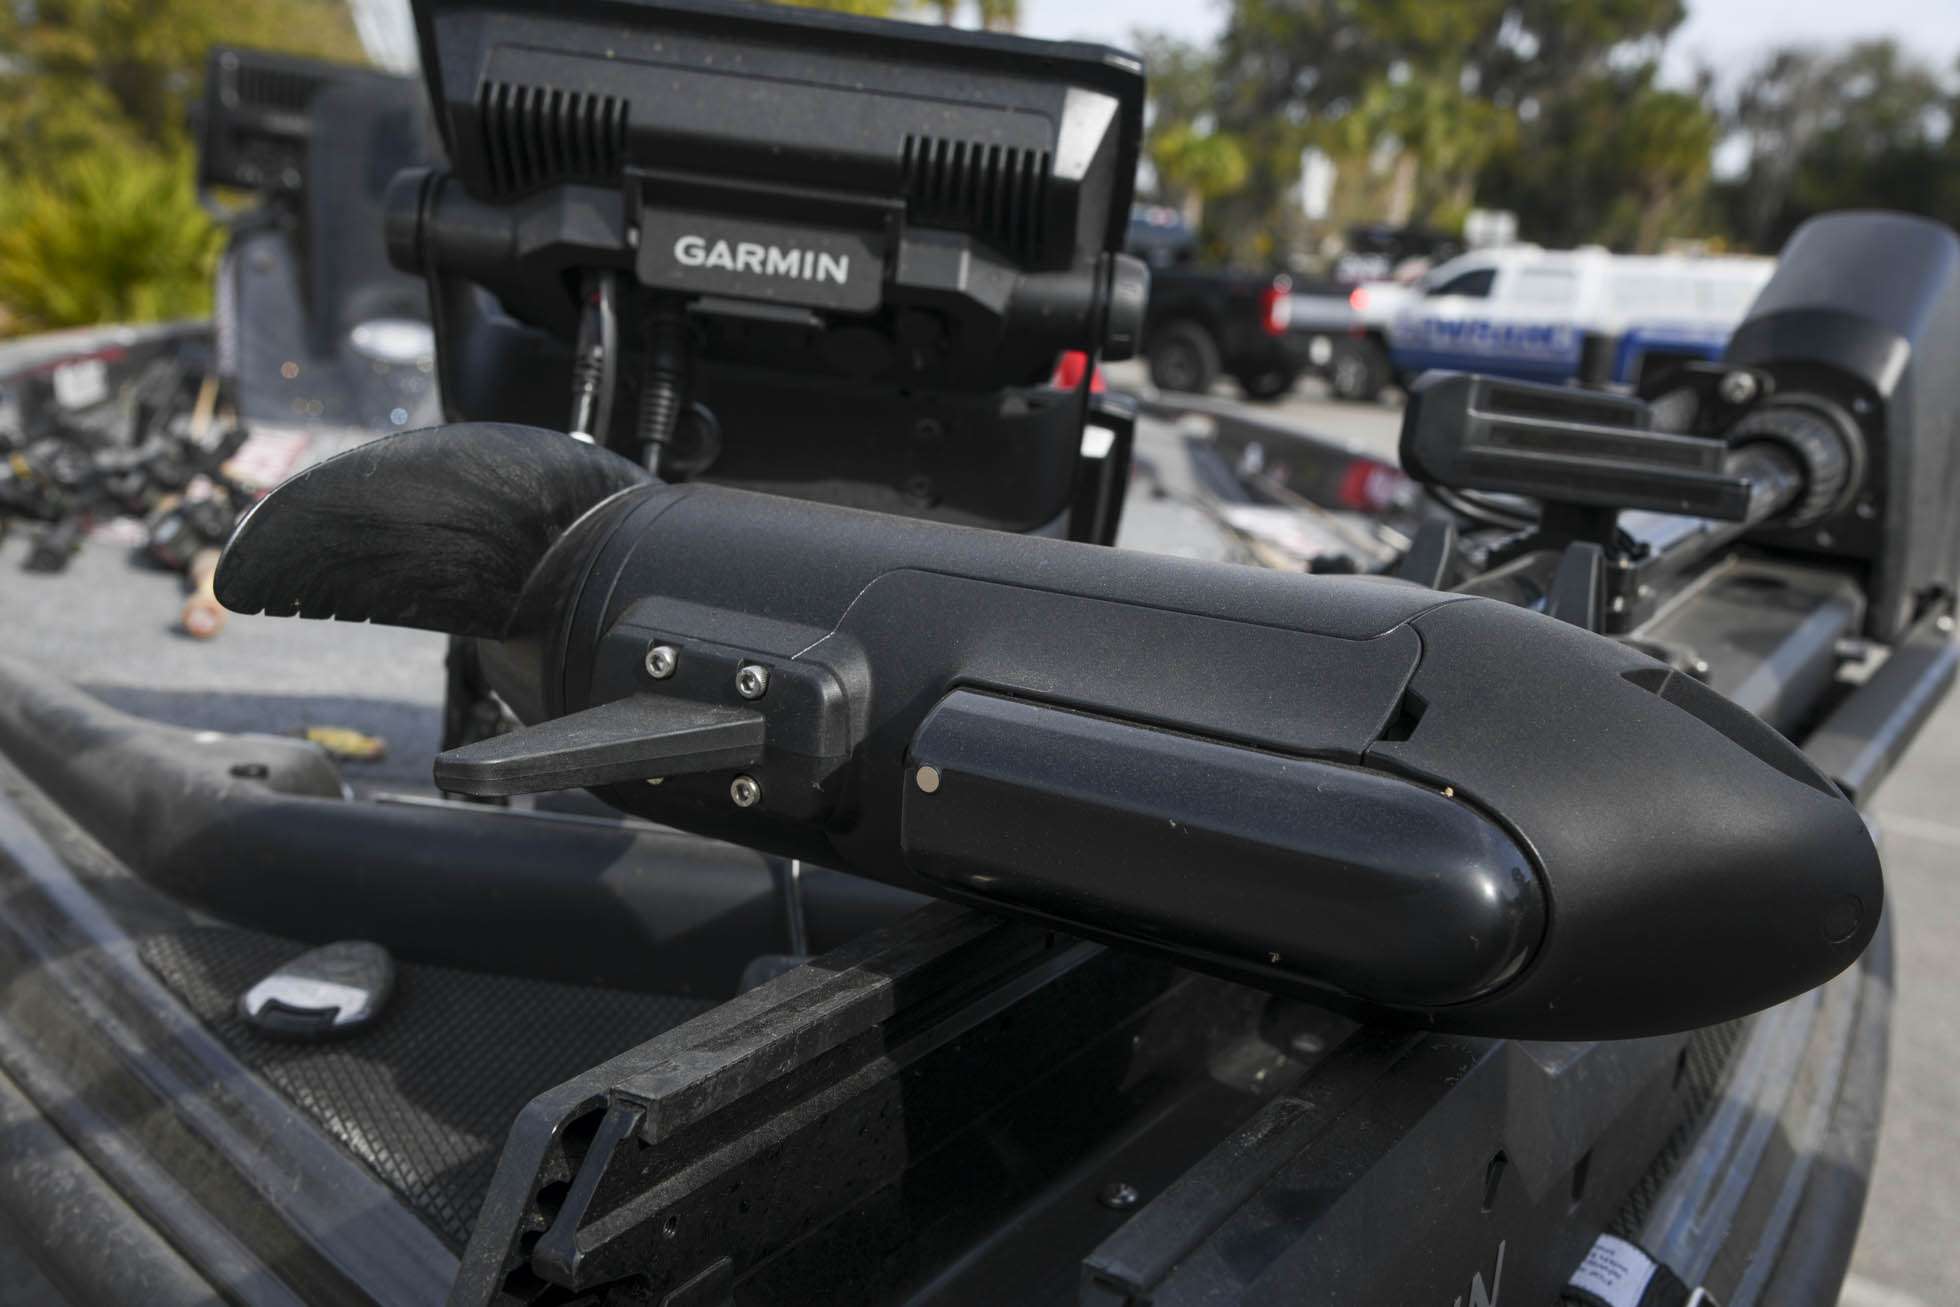 The Garmin Force has integrated transducers and LiveScope that pair perfectly with his Garmin electronics. âWith it being a Garmin, I can now link my unit straight to my trolling motor,â Mullins said. âItâs an all-integrated system that works well together.â